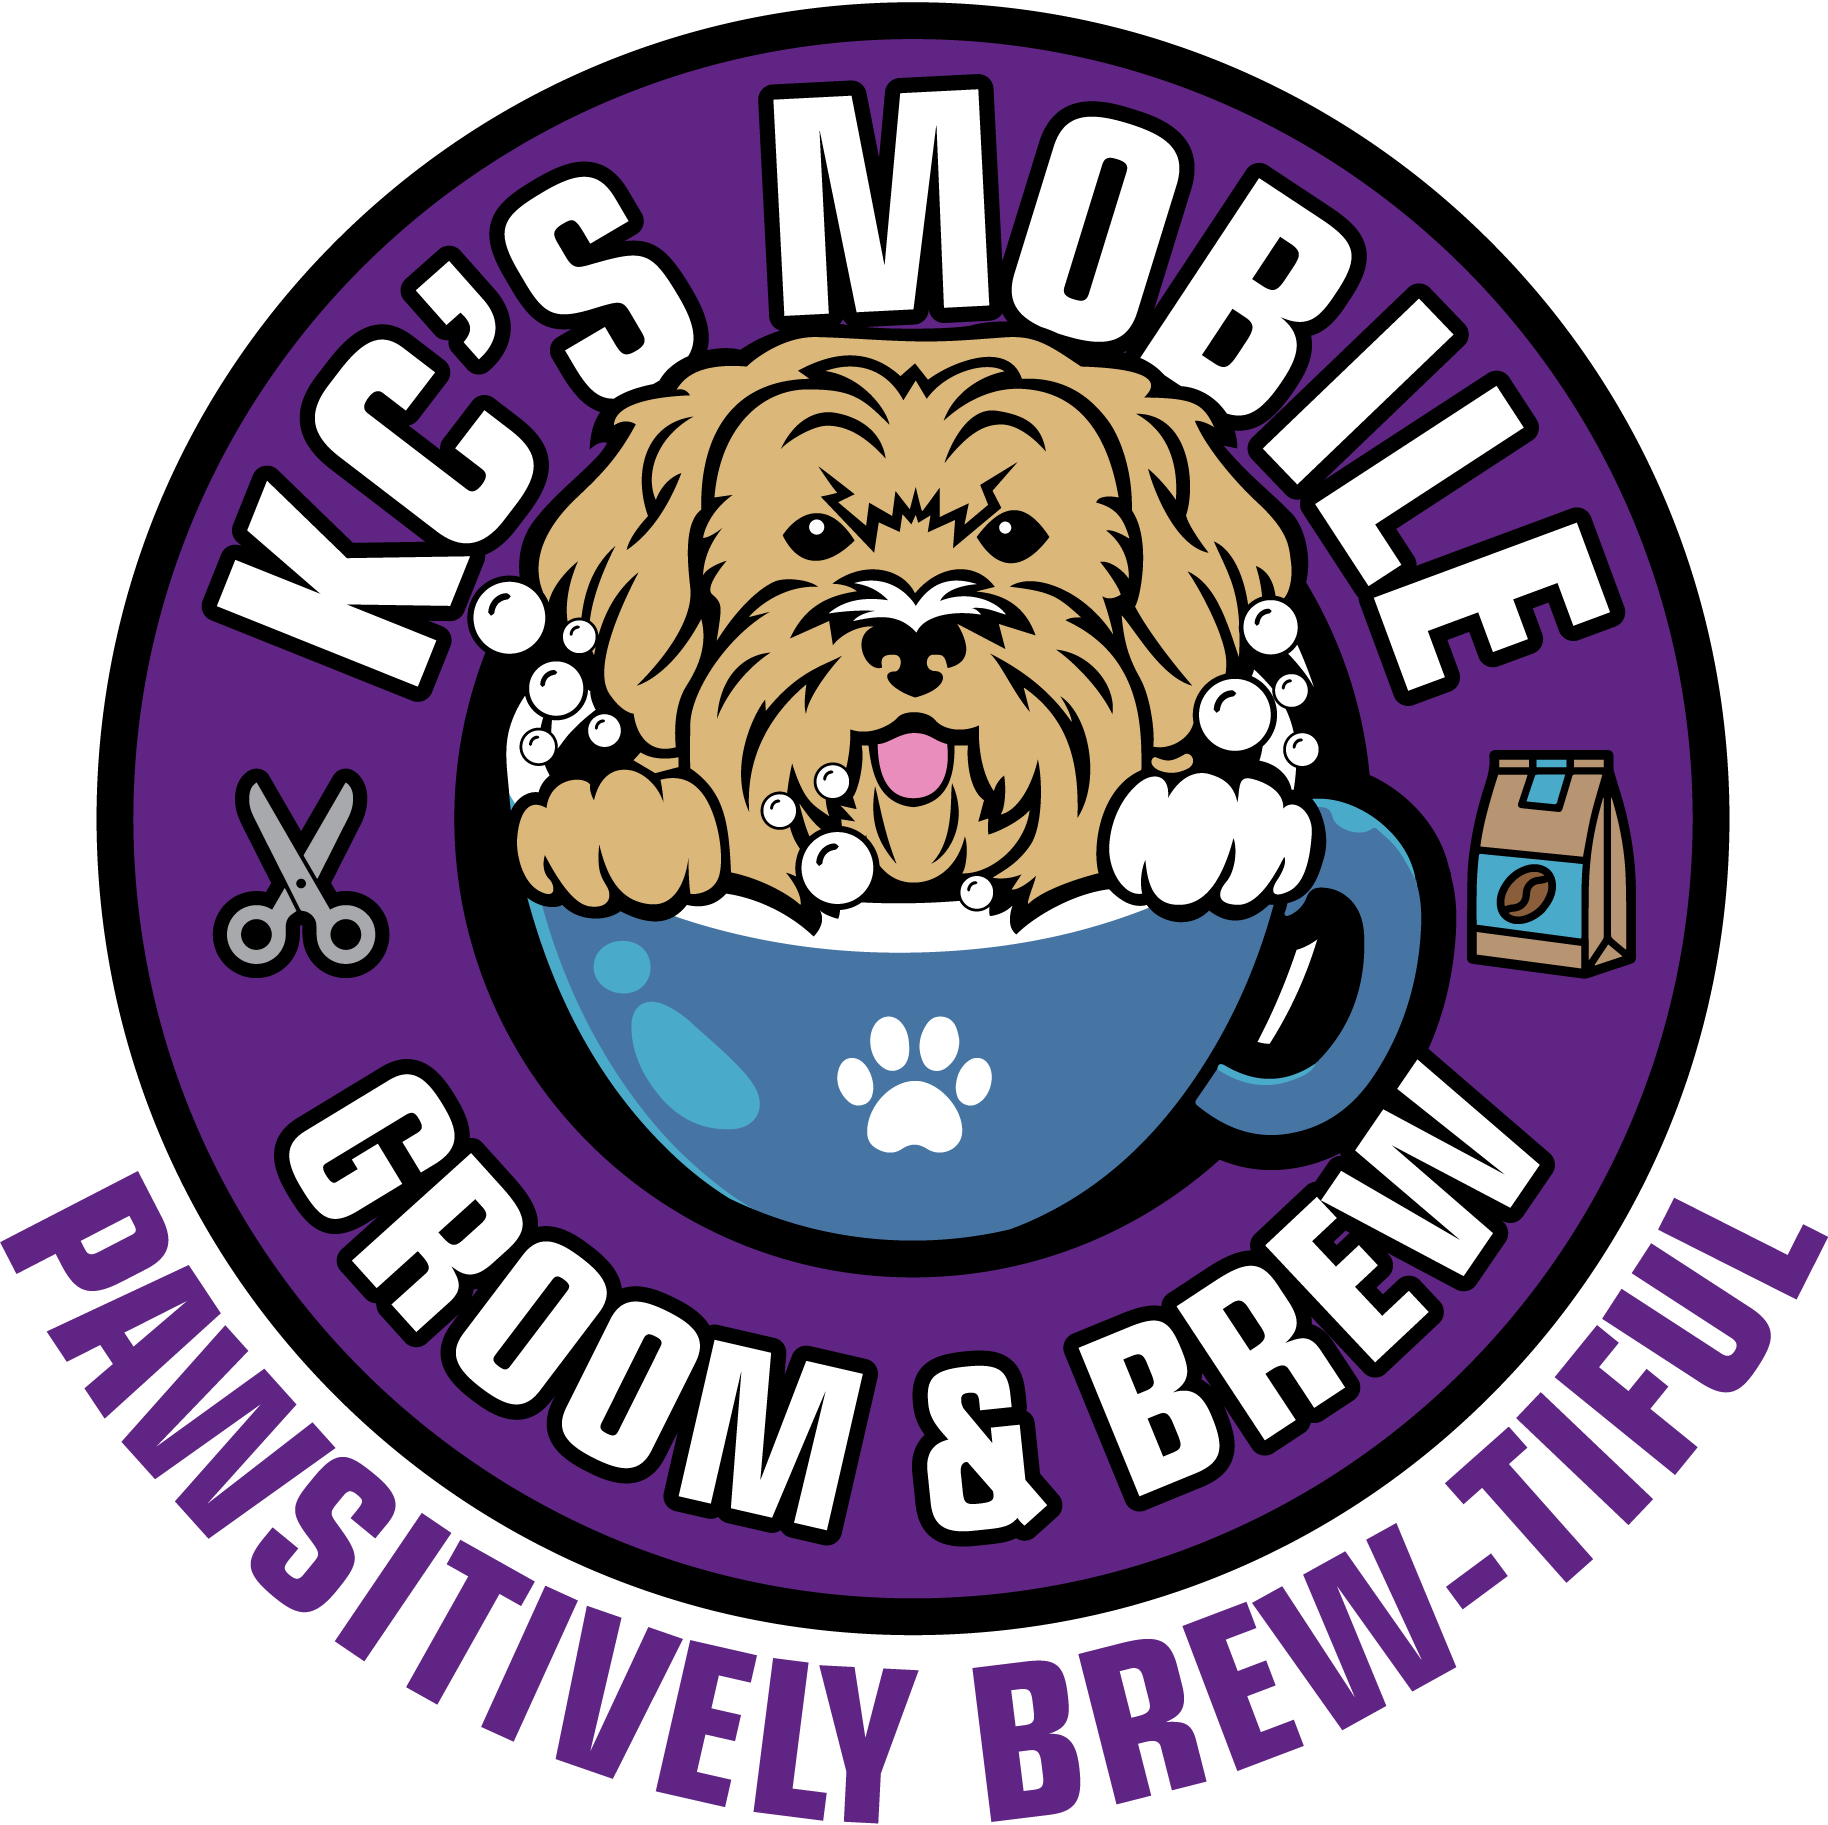 KC’s Mobile Groom and Brew